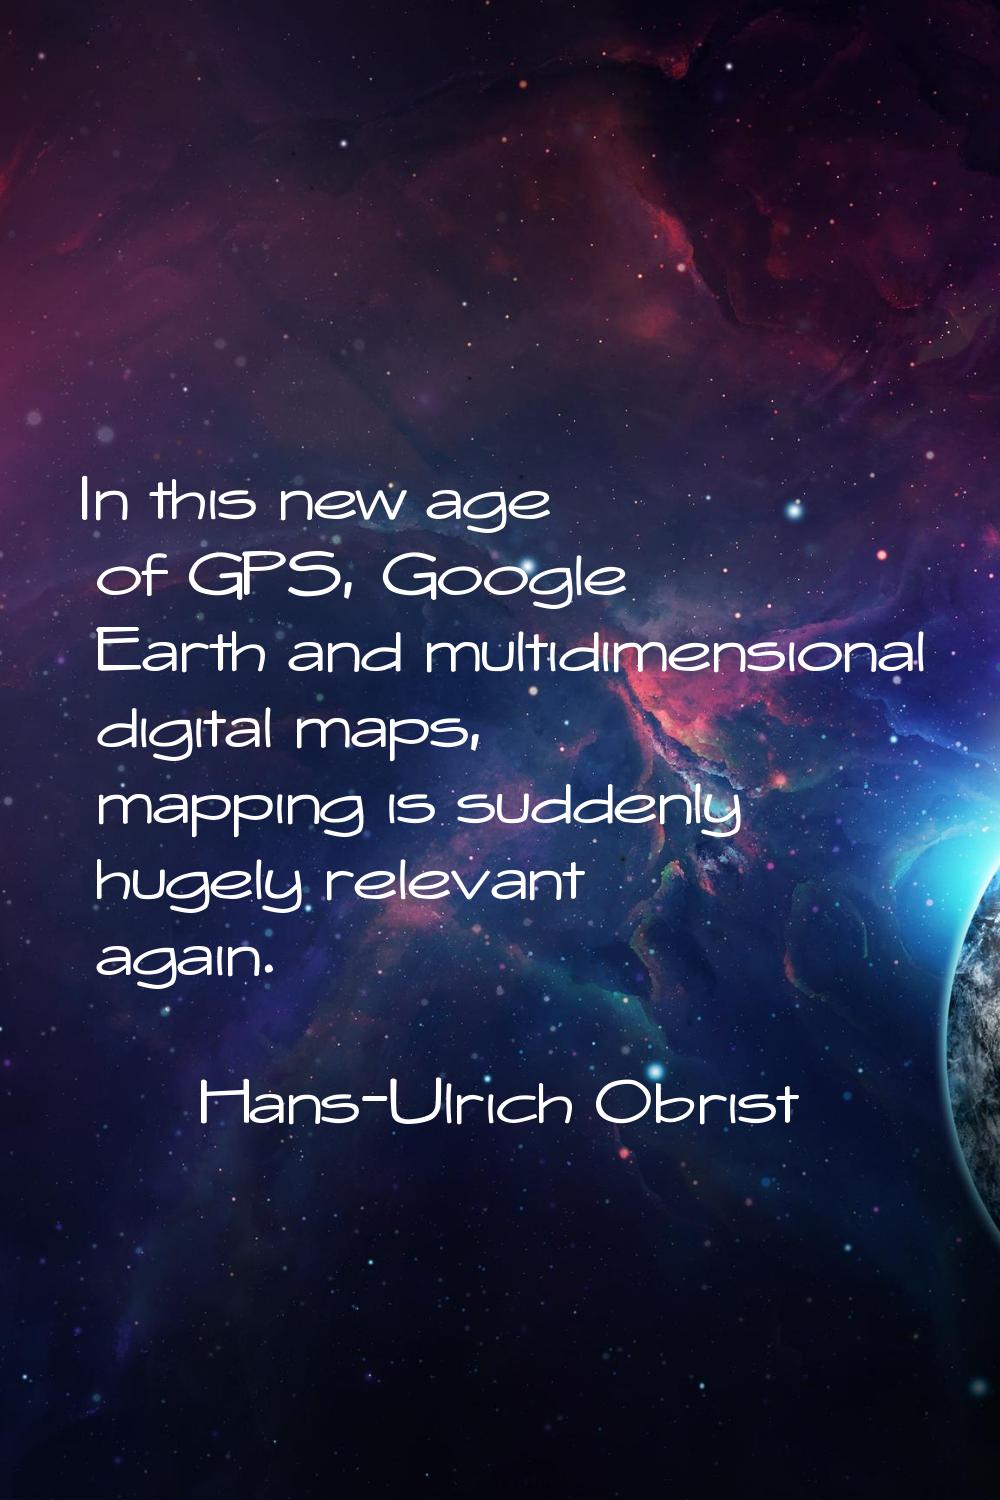 In this new age of GPS, Google Earth and multidimensional digital maps, mapping is suddenly hugely 